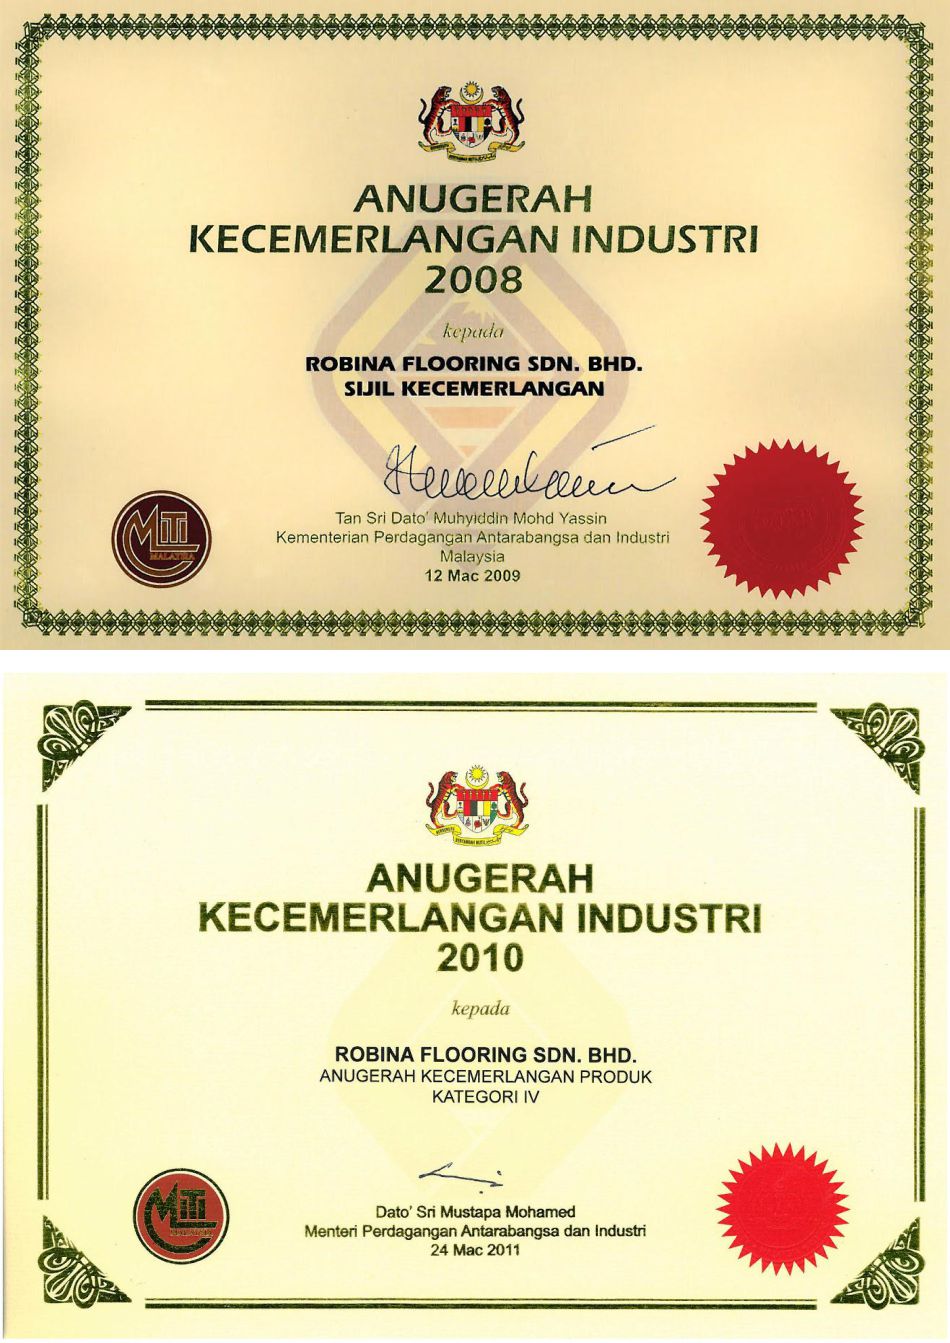 Certificate of Export Excellence 2008 & Product Excellence Award 2010